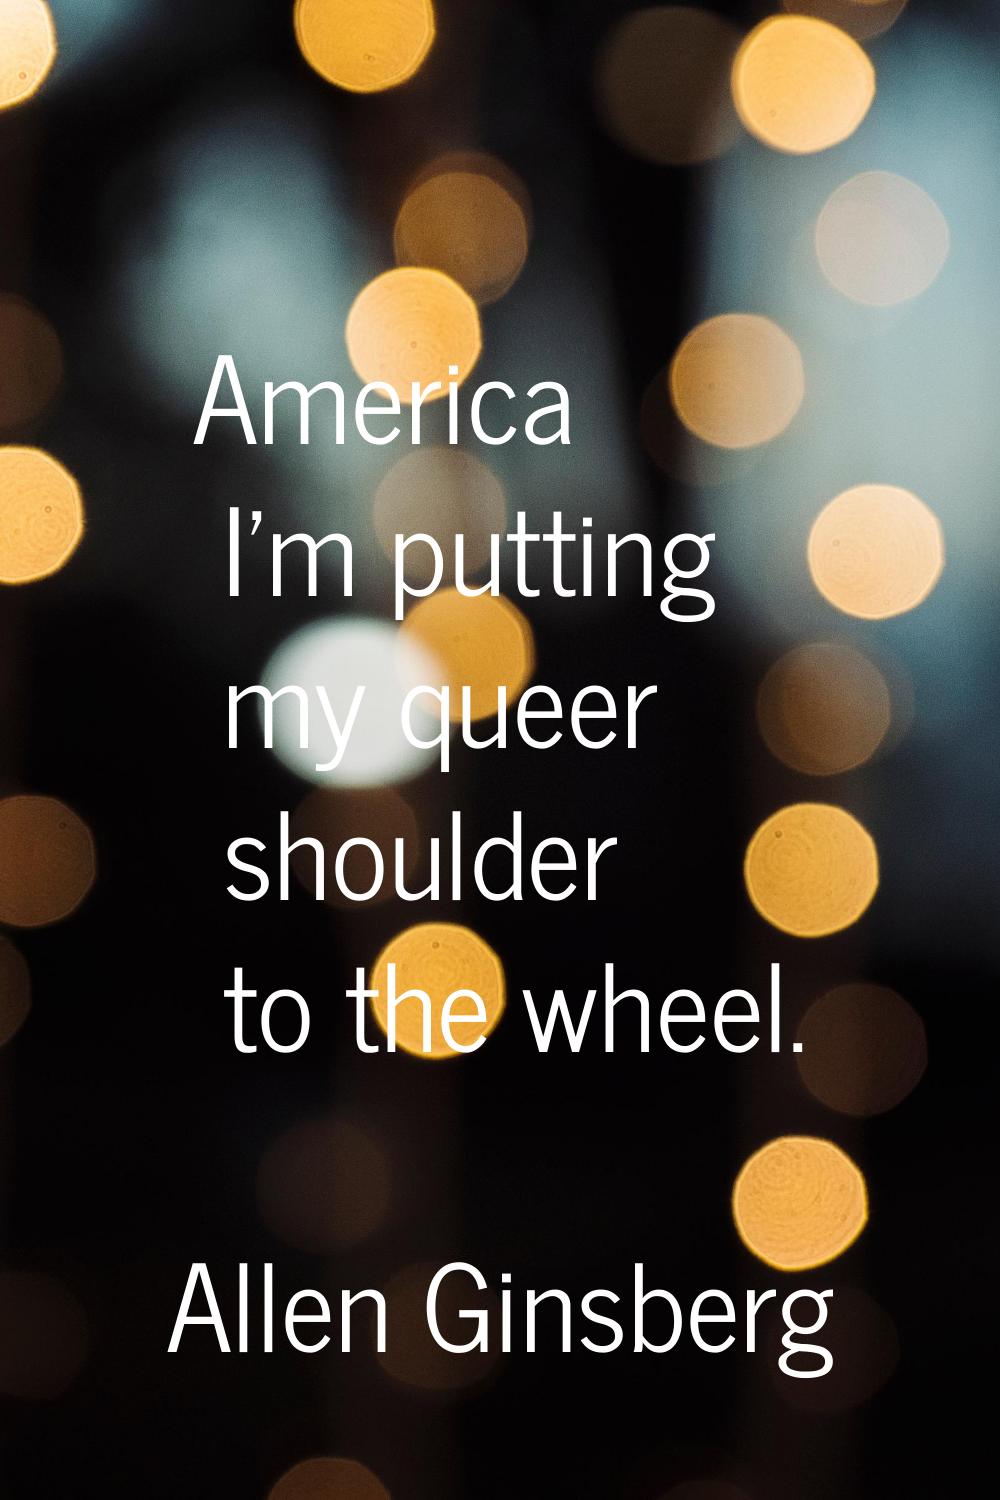 America I'm putting my queer shoulder to the wheel.